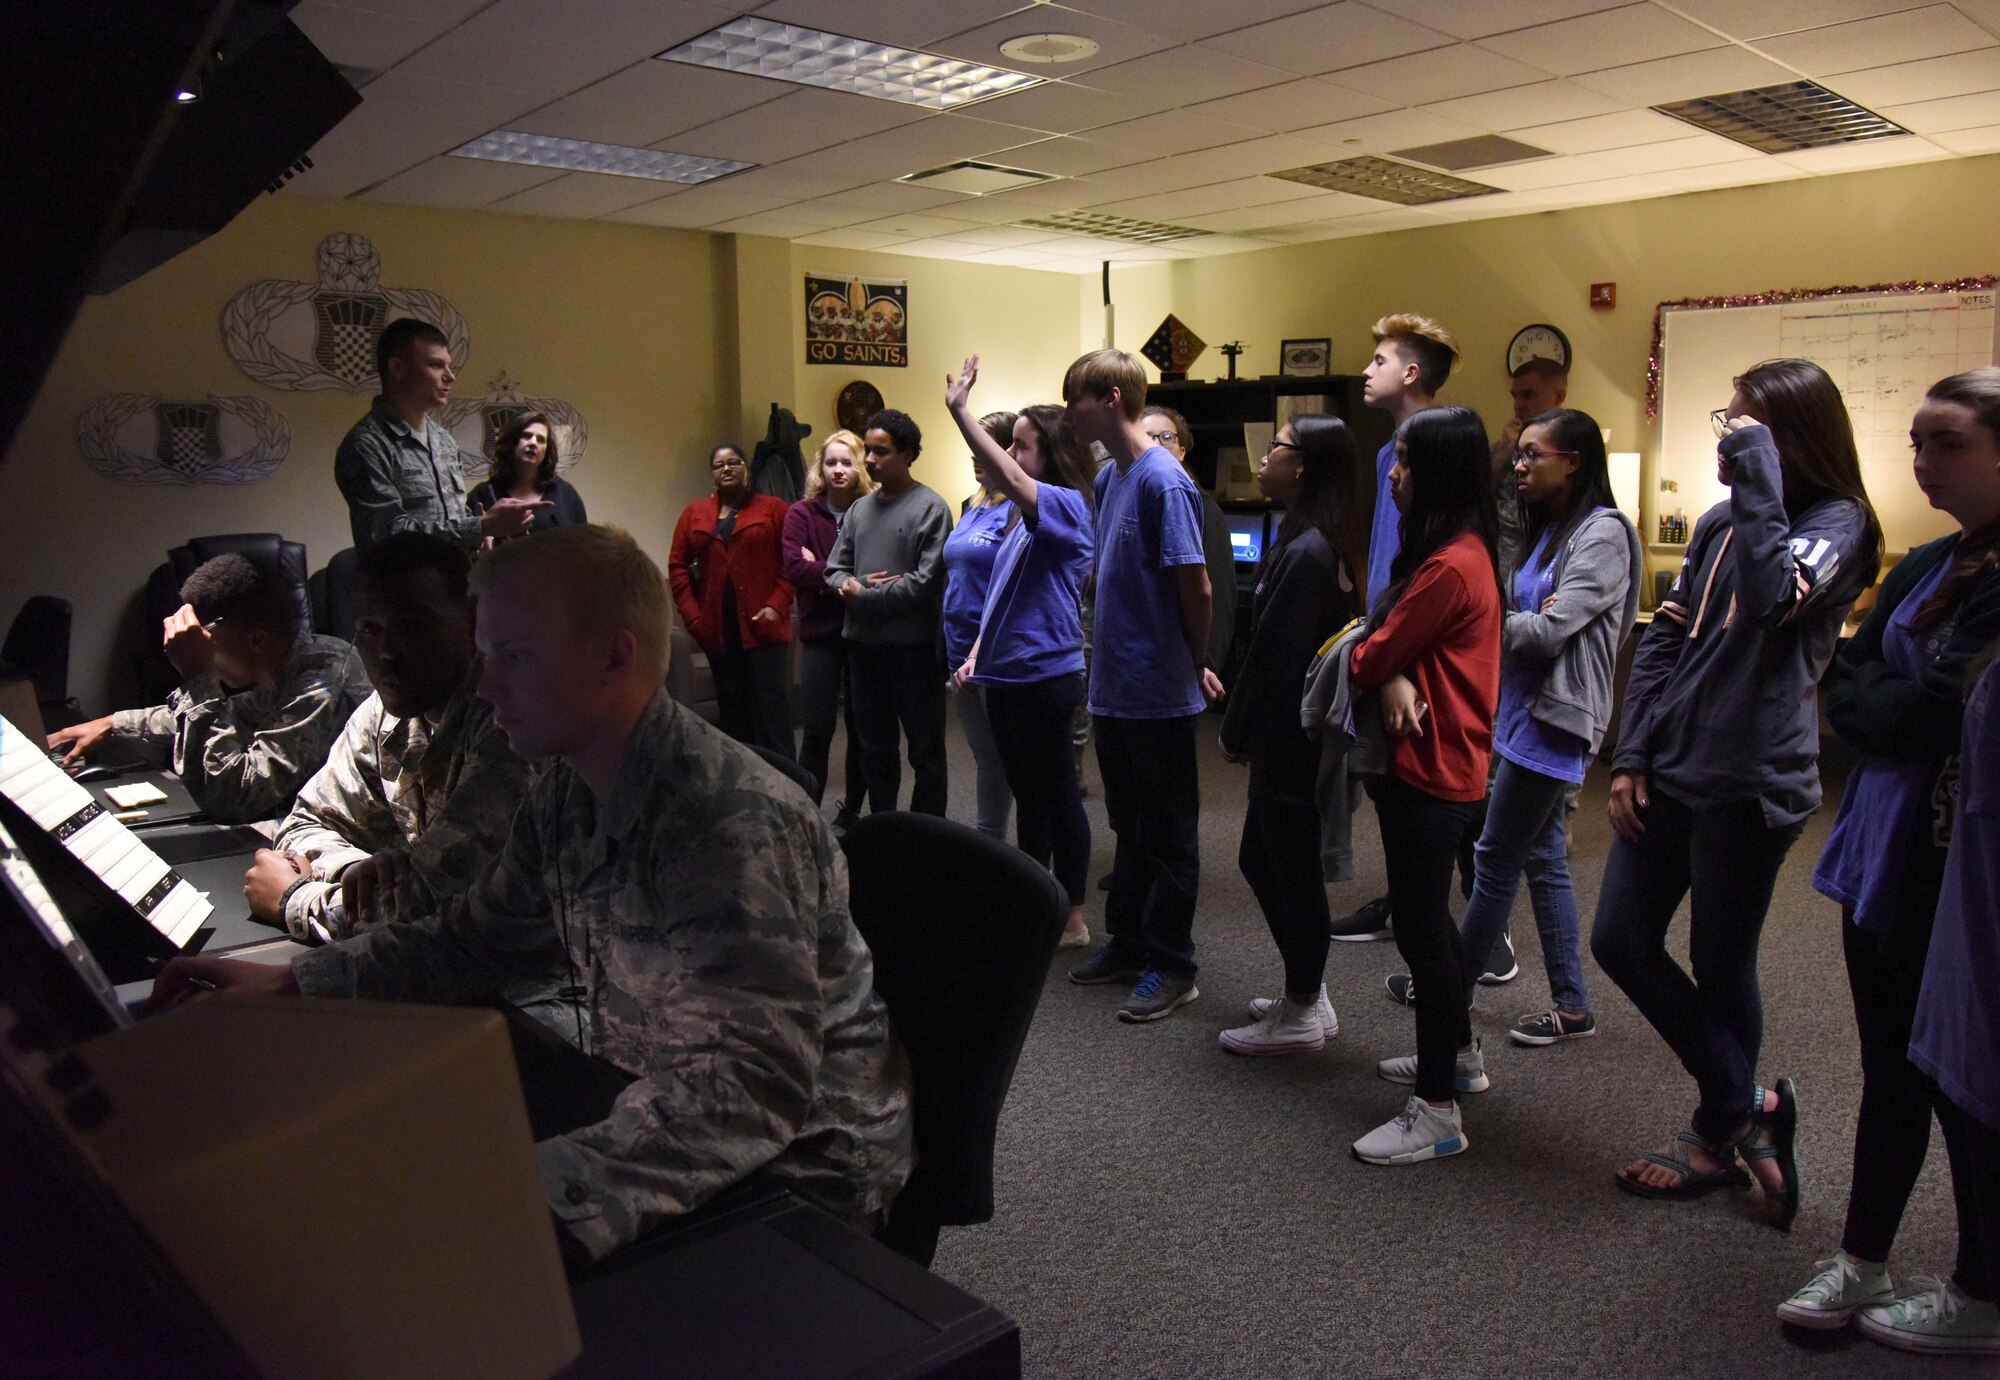 Staff Sgt. Benjamin Graham, 334th Training Squadron instructor, briefs local high school freshmen on the air traffic control course at Cody Hall during the Biloxi Chamber of Commerce Gulf Coast Junior Leadership Tour Jan. 24, 2017, on Keesler Air Force Base, Miss. The group’s objective is to produce students of outstanding character, while teaching them about community needs and what it takes to become a leader in today’s society. The visit also included a military training leader briefing and a dorm tour. (U.S. Air Force photo by Kemberly Groue)